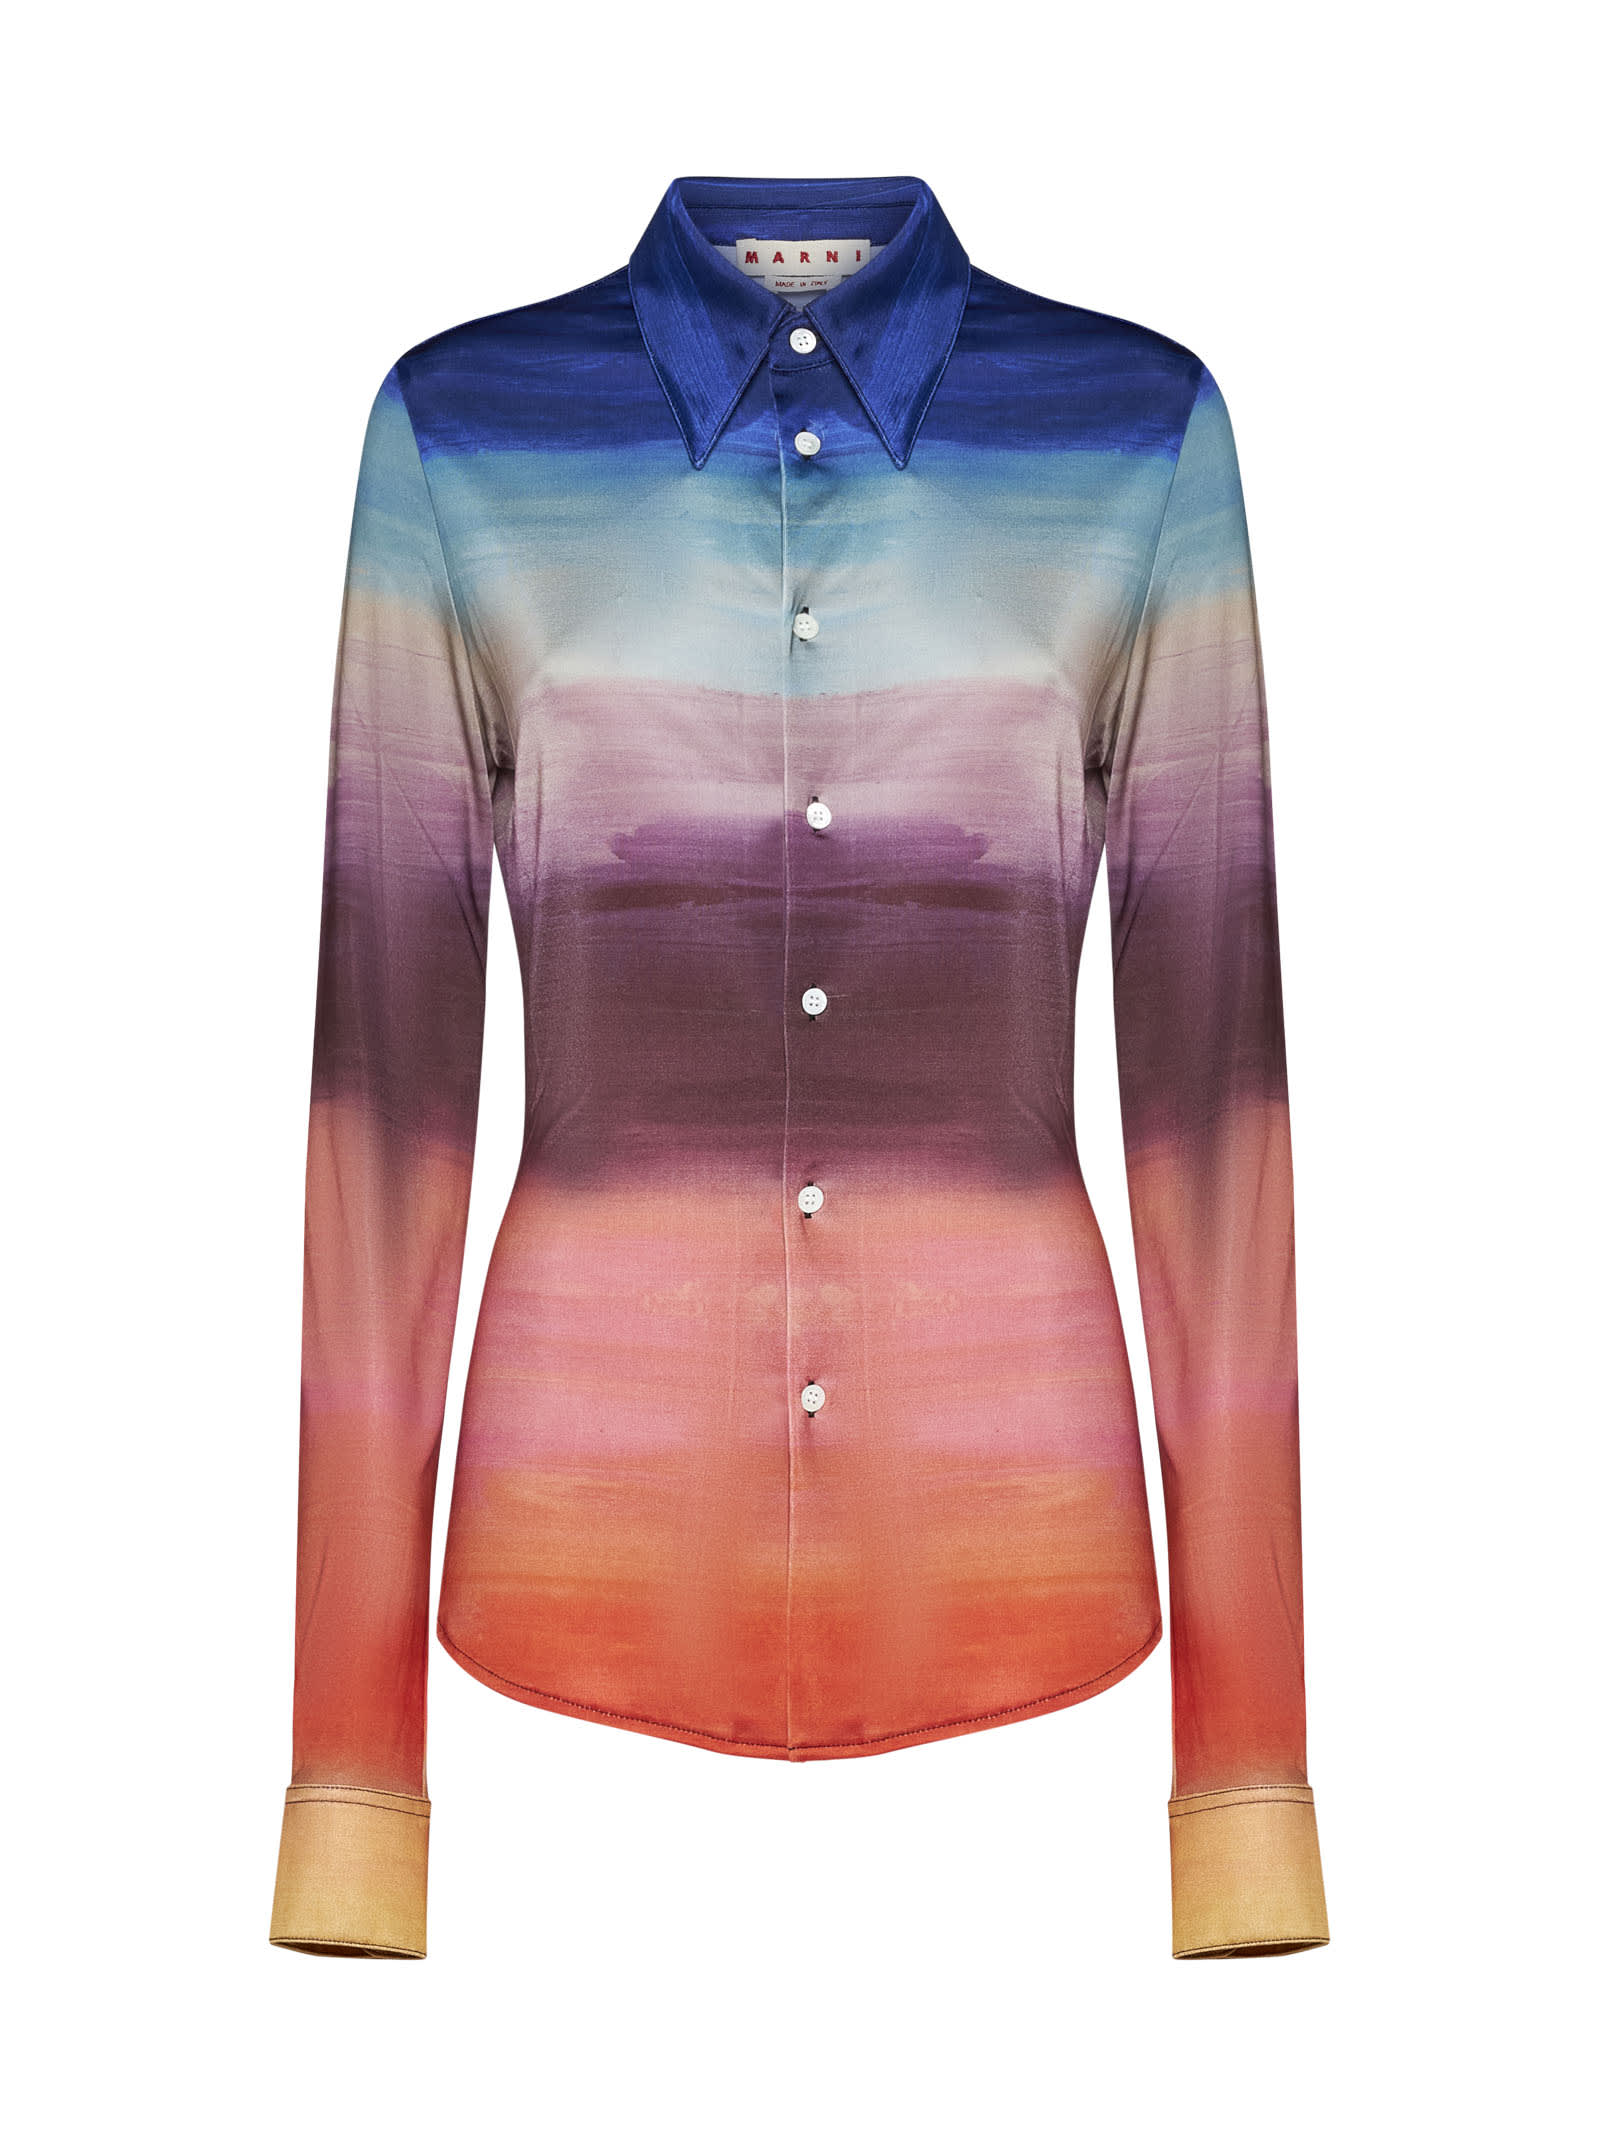 Multicoloured Jersey Shirt With Dark Side Of The Moon Print